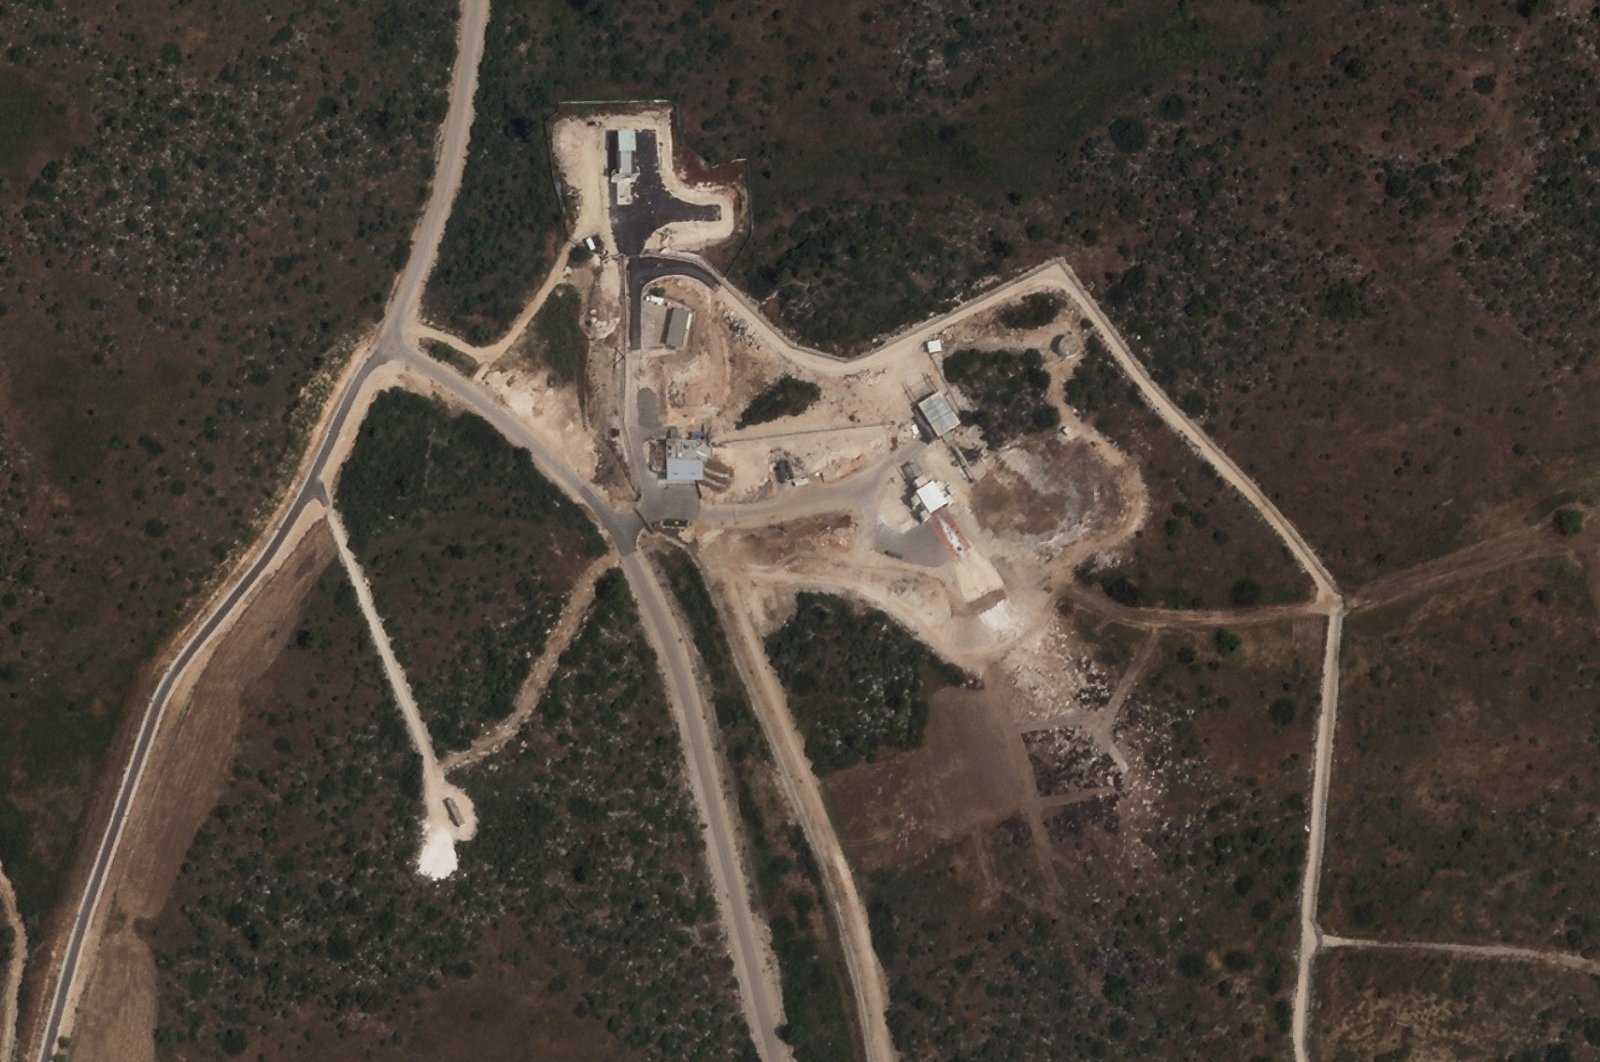 A satellite photo shows what analysts describe as a test site for rocket motors at the secretive Sdot Micha Air Base, Israel, April 24, 2021. (Planet Labs Inc. via AP)